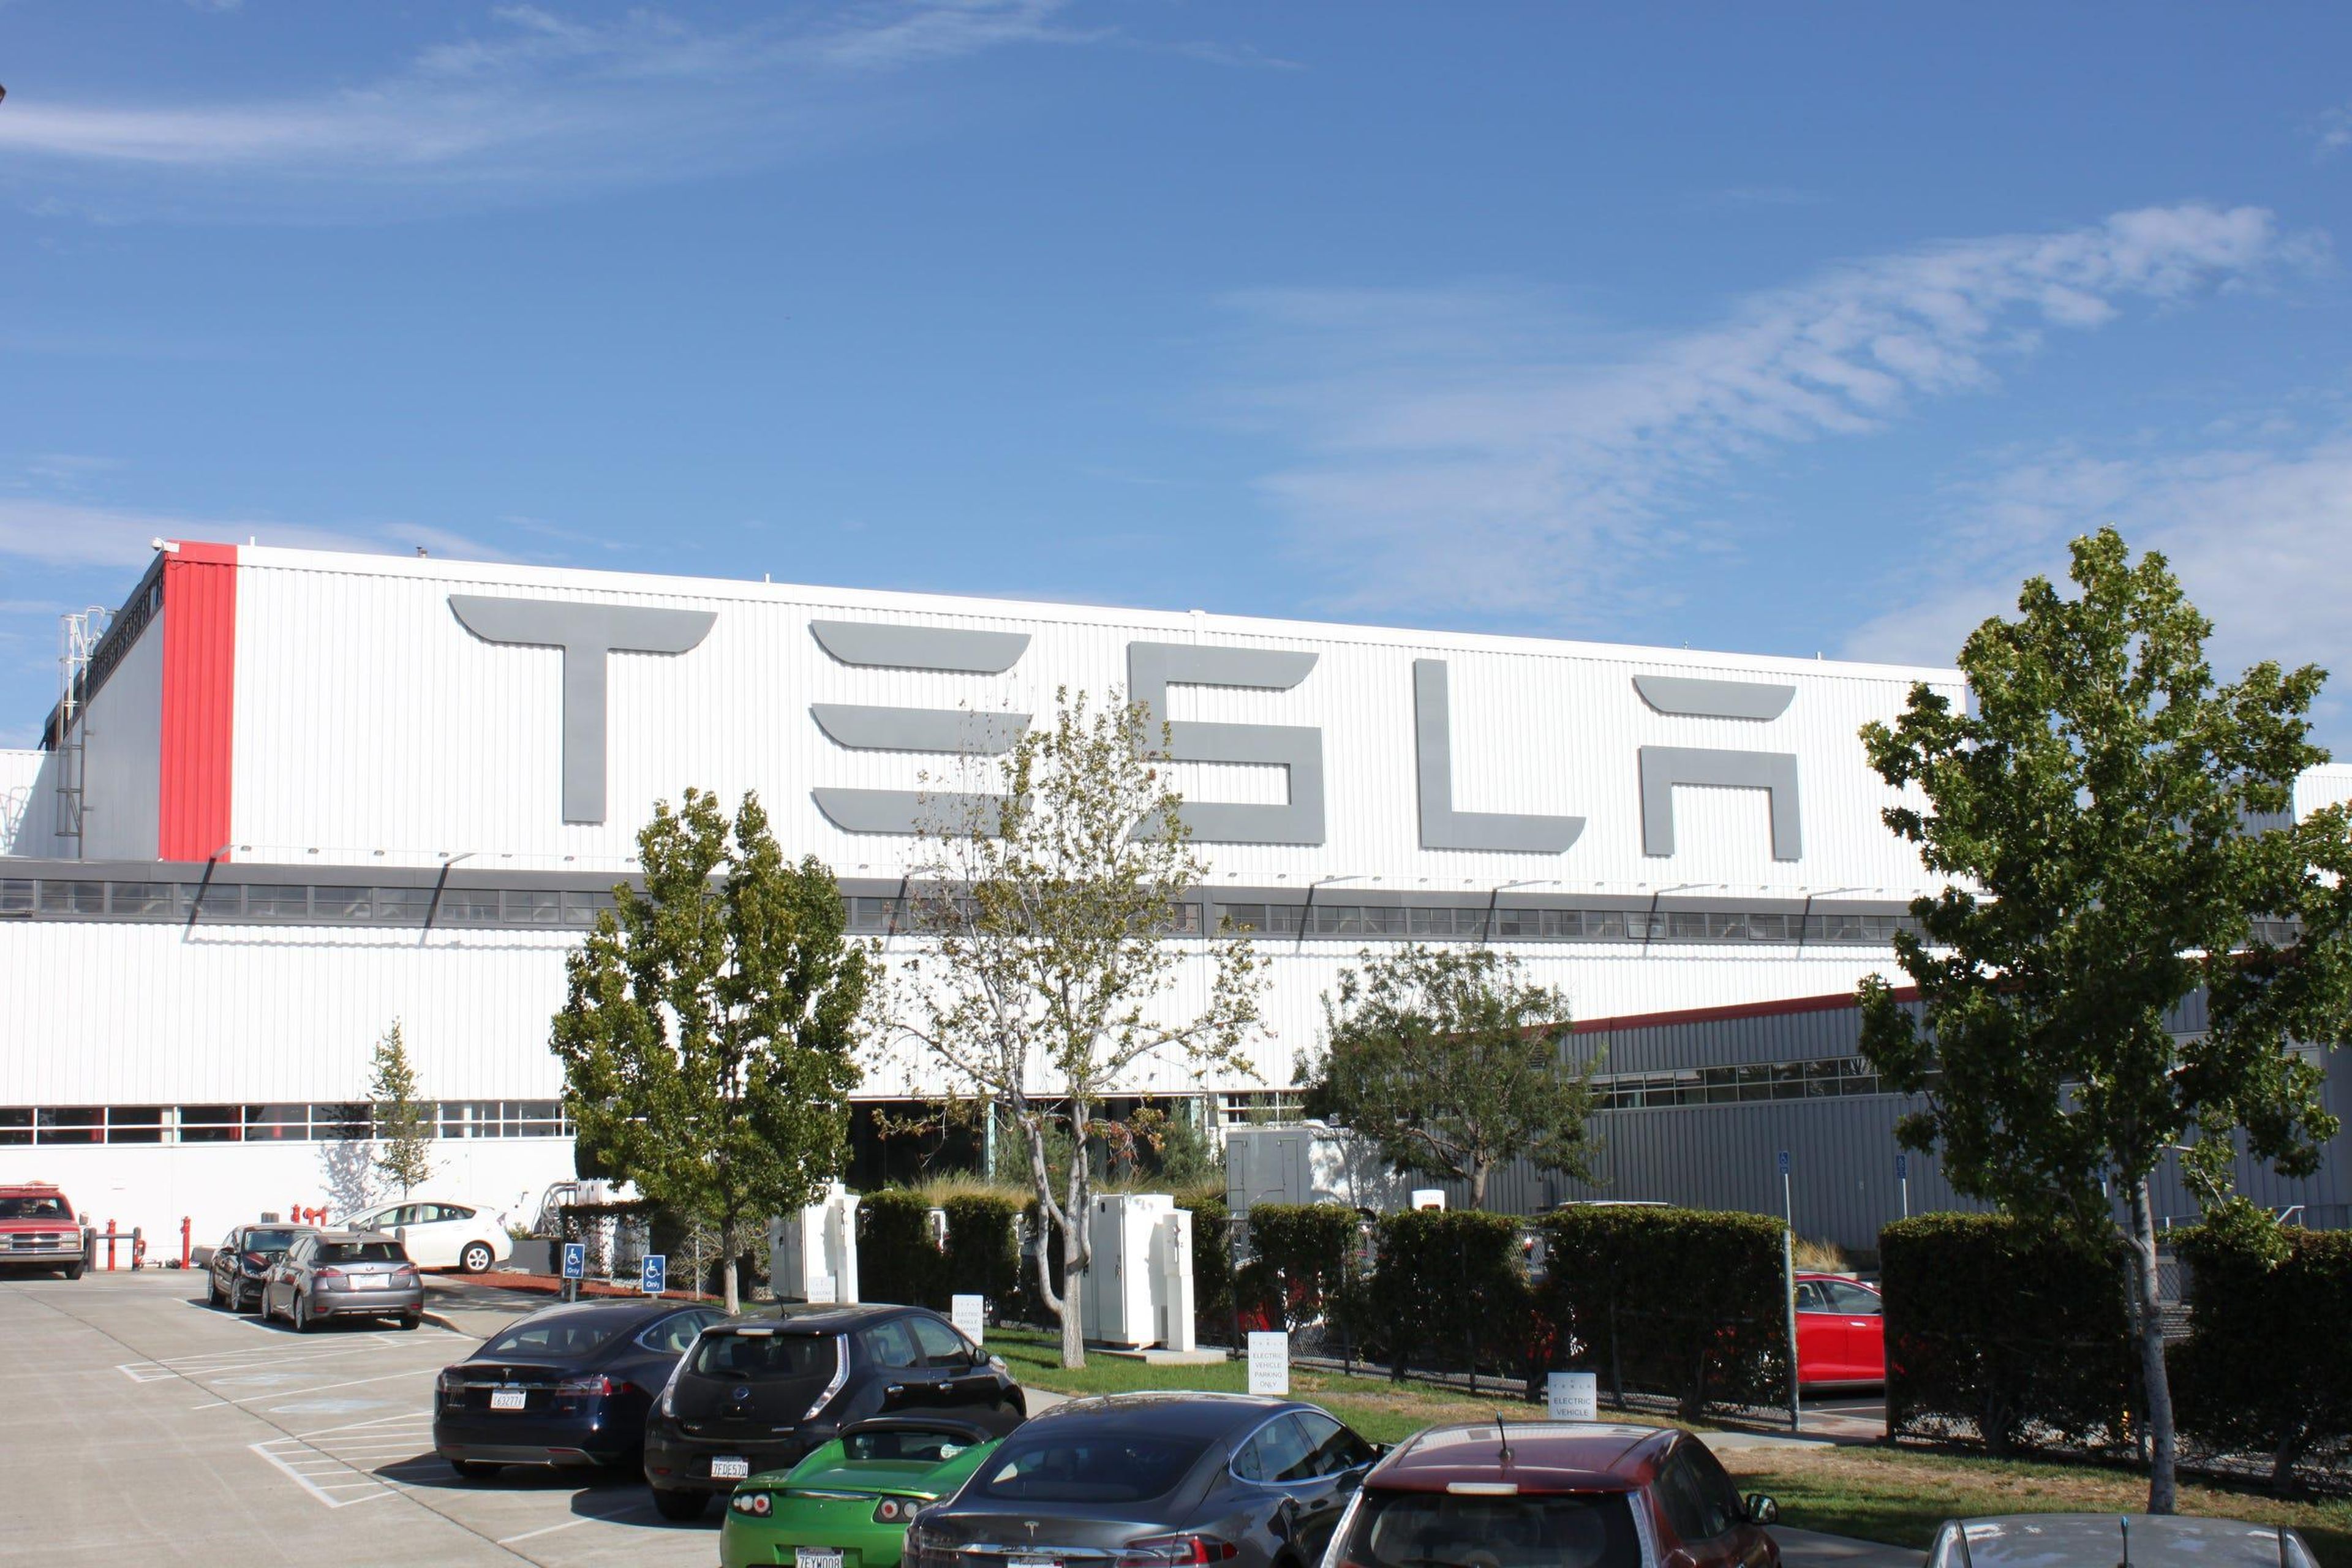 3. The Tesla Factory. In 2010, Tesla bought what had been a jointly operating GM/Toyota plant, formerly known as NUMMI. Tesla picked up the plant for a bargain price of $42 million, following GM's 2009 bankruptcy.